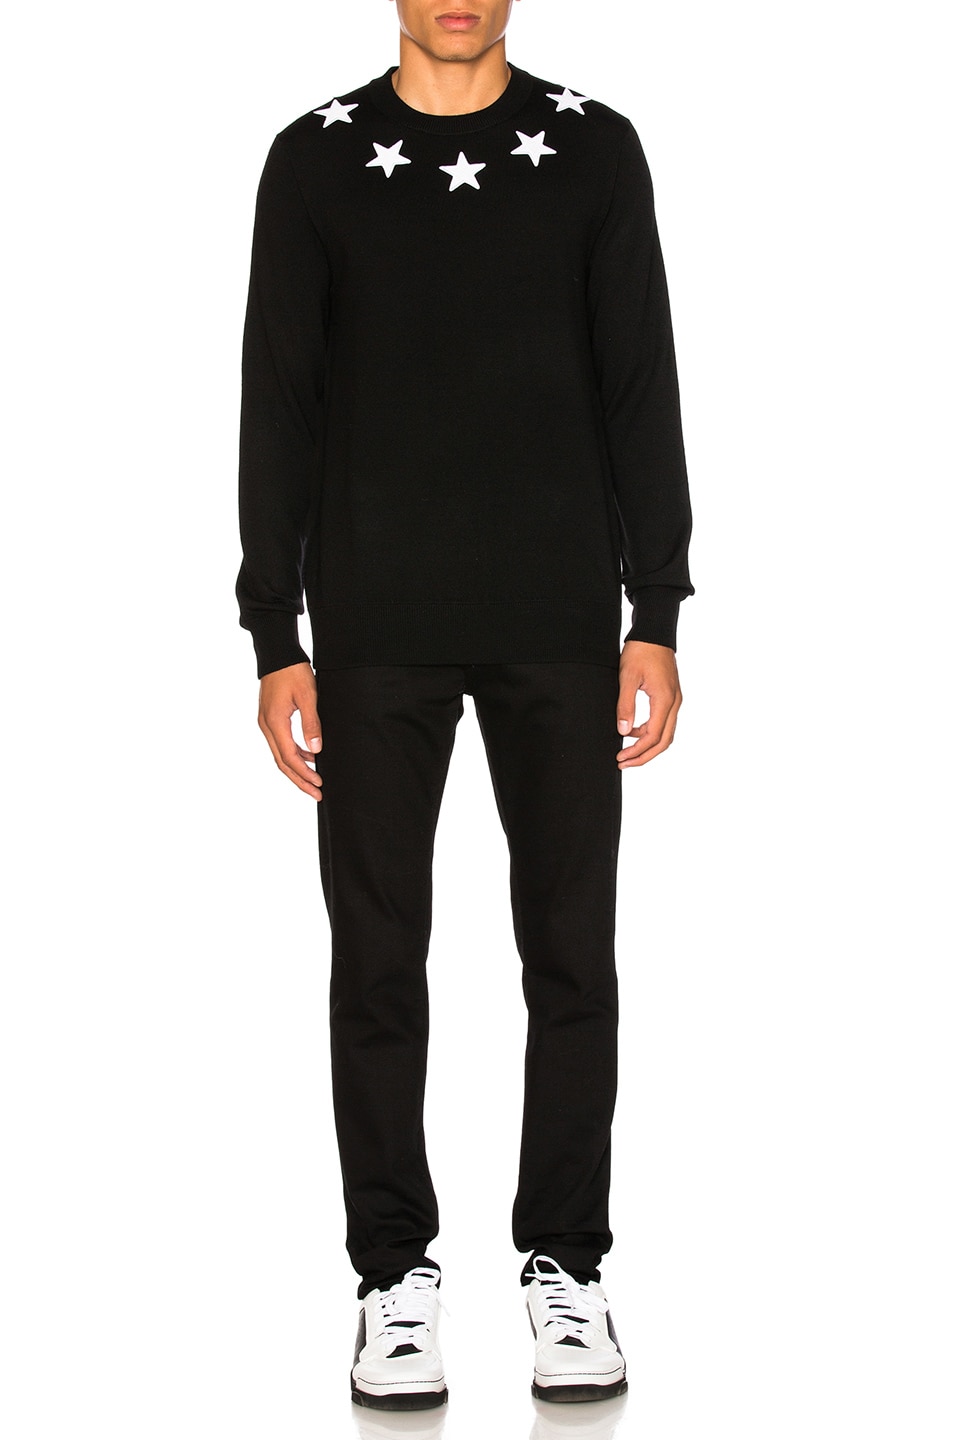 GIVENCHY Star Patches Wool Blend Sweater, Black/White | ModeSens